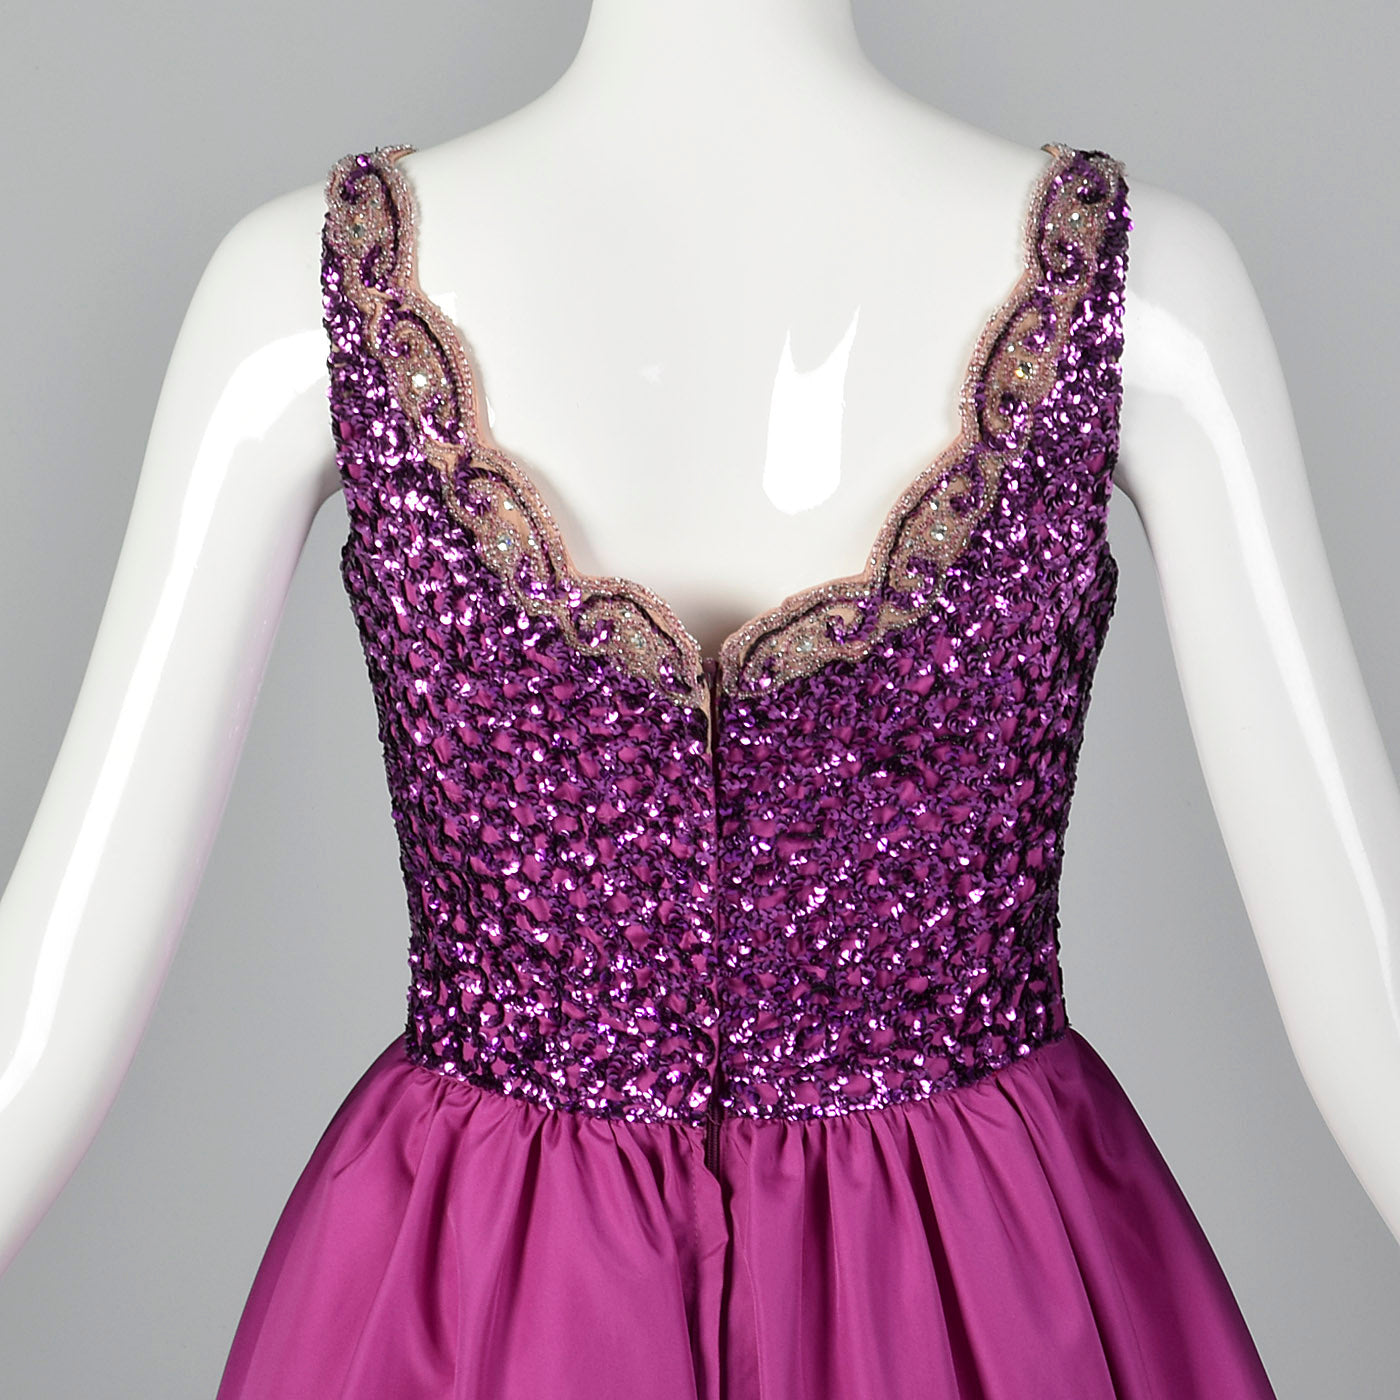 Small 1980s Fuchsia Dress with Sequined Bodice